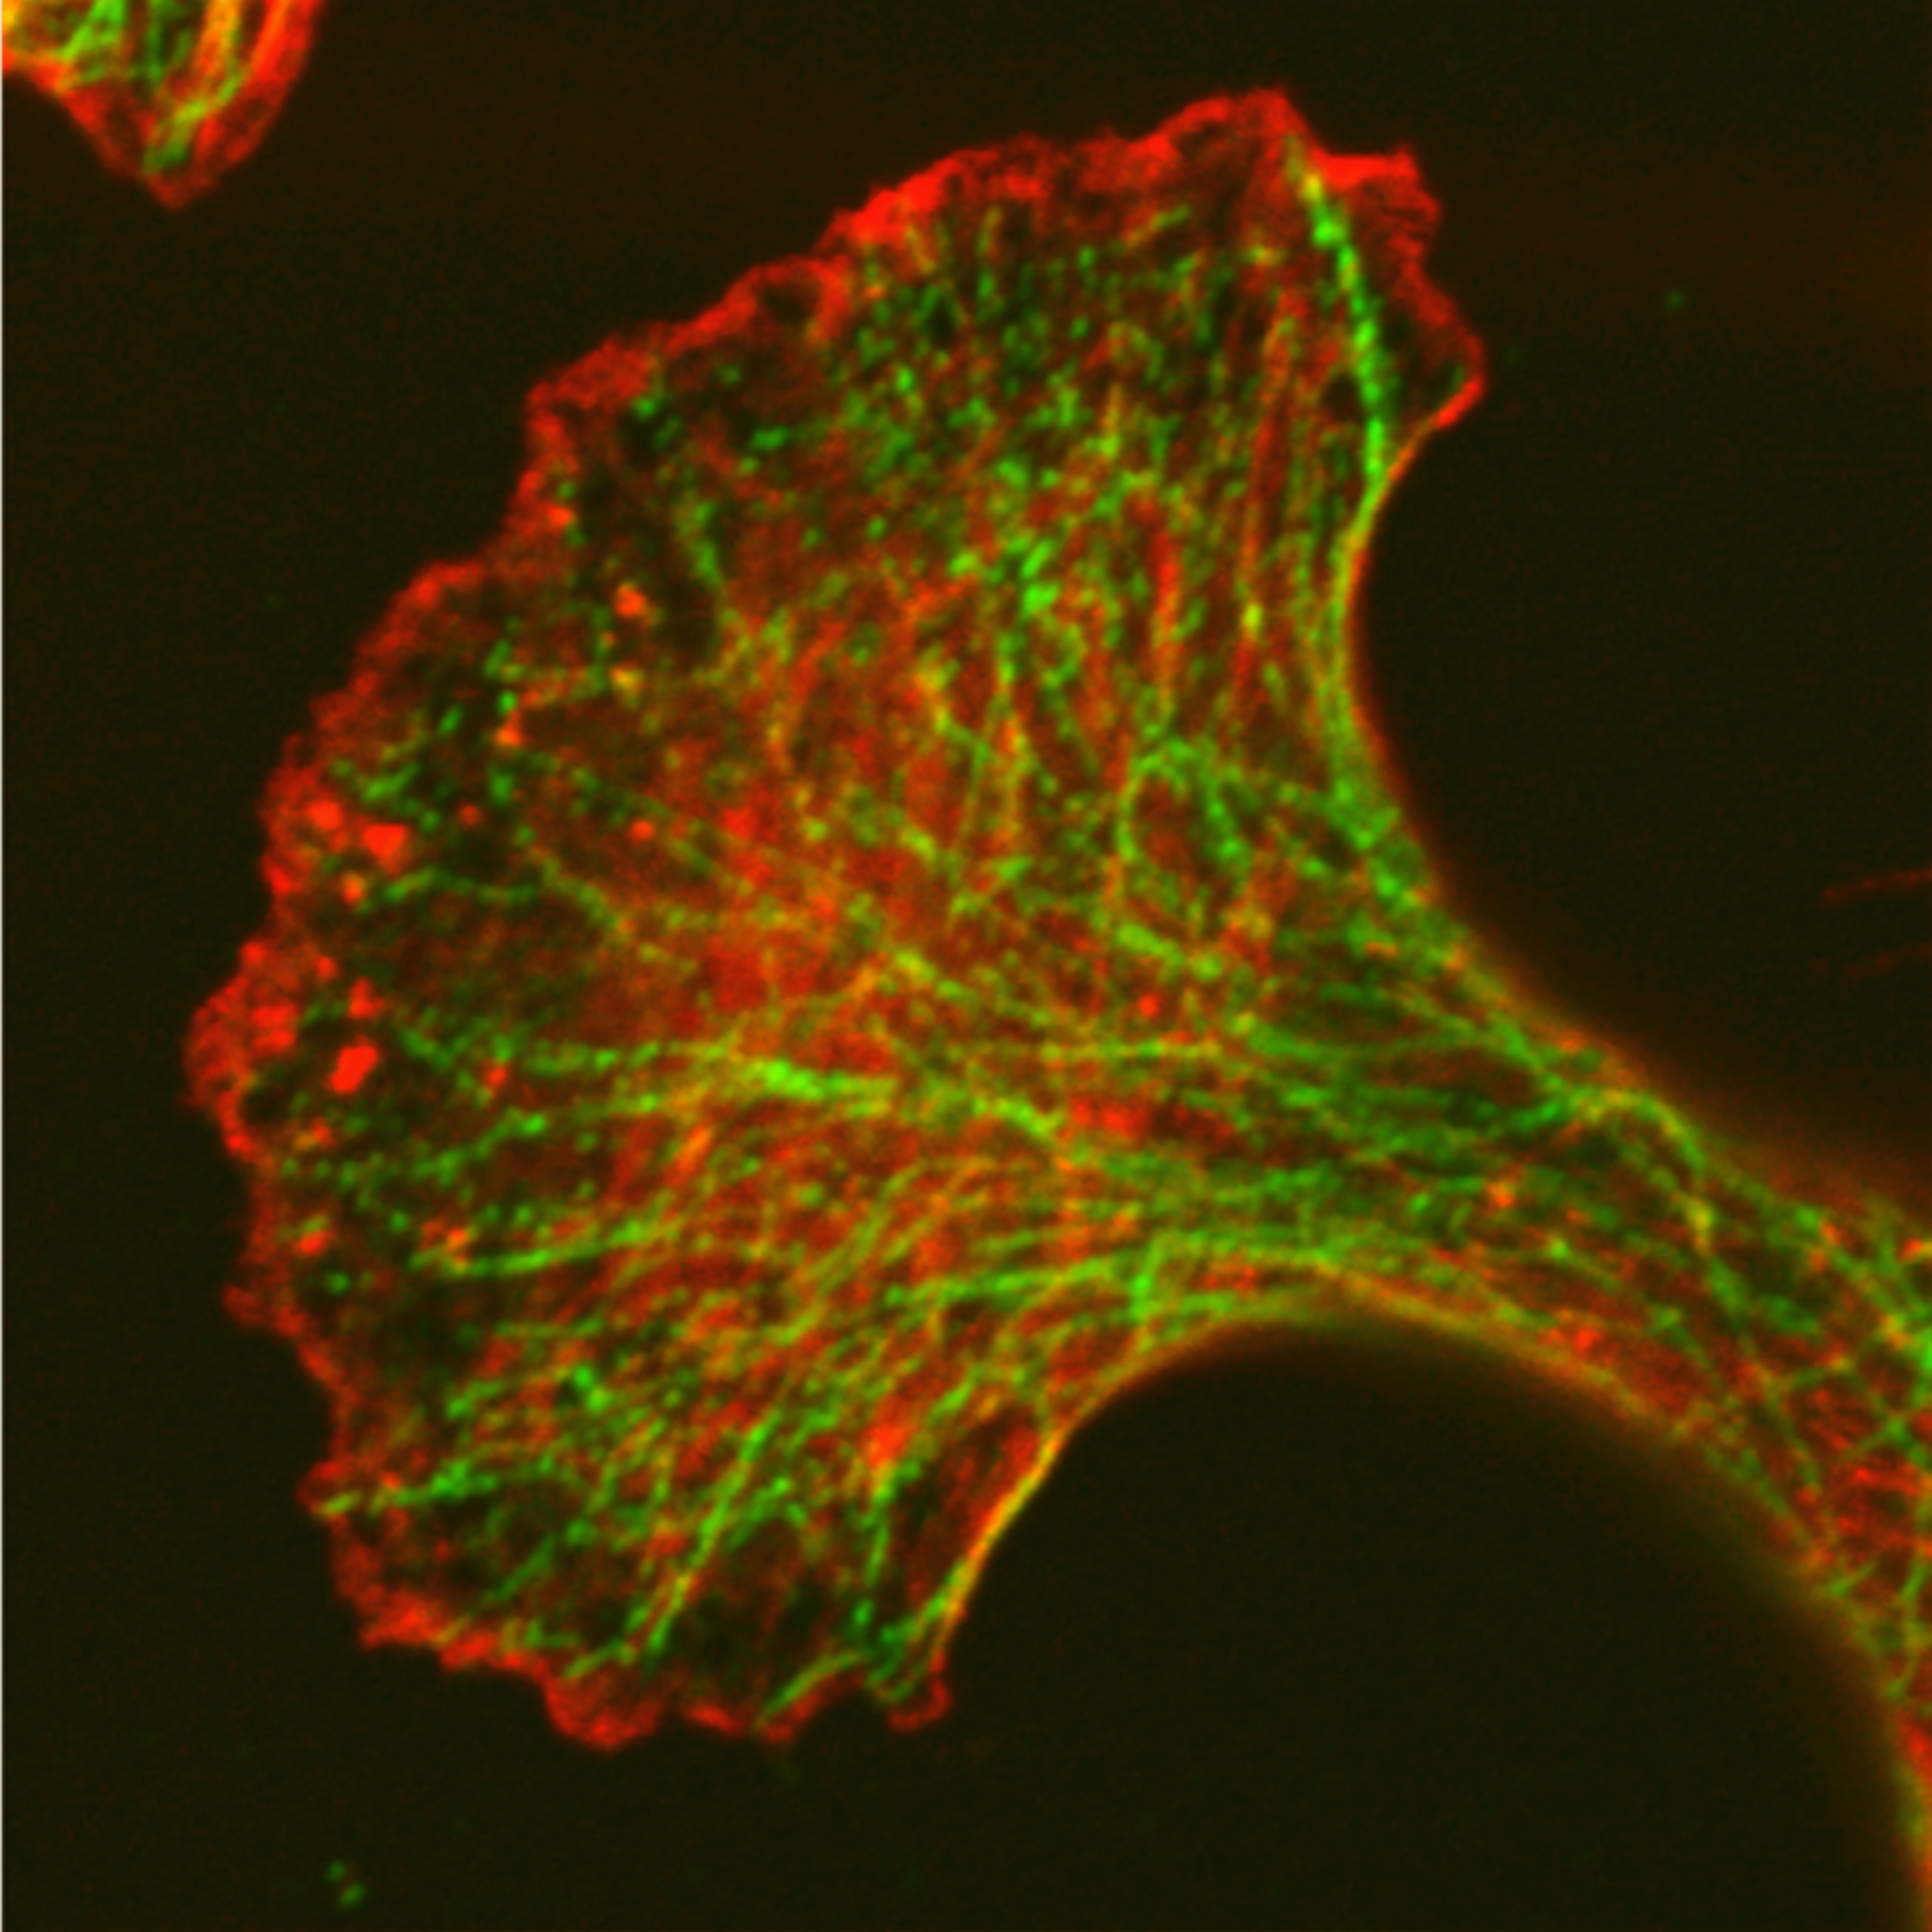 Watching Cell Movement. Microfilaments (red) and microtubules (green) are parts of the cell cytoskeleton, which gives cells their shape and enables them to divide and migrate, as during metastasis. Some commonly used cancer drugs, such as paclitaxel (Taxol®), target microtubules.